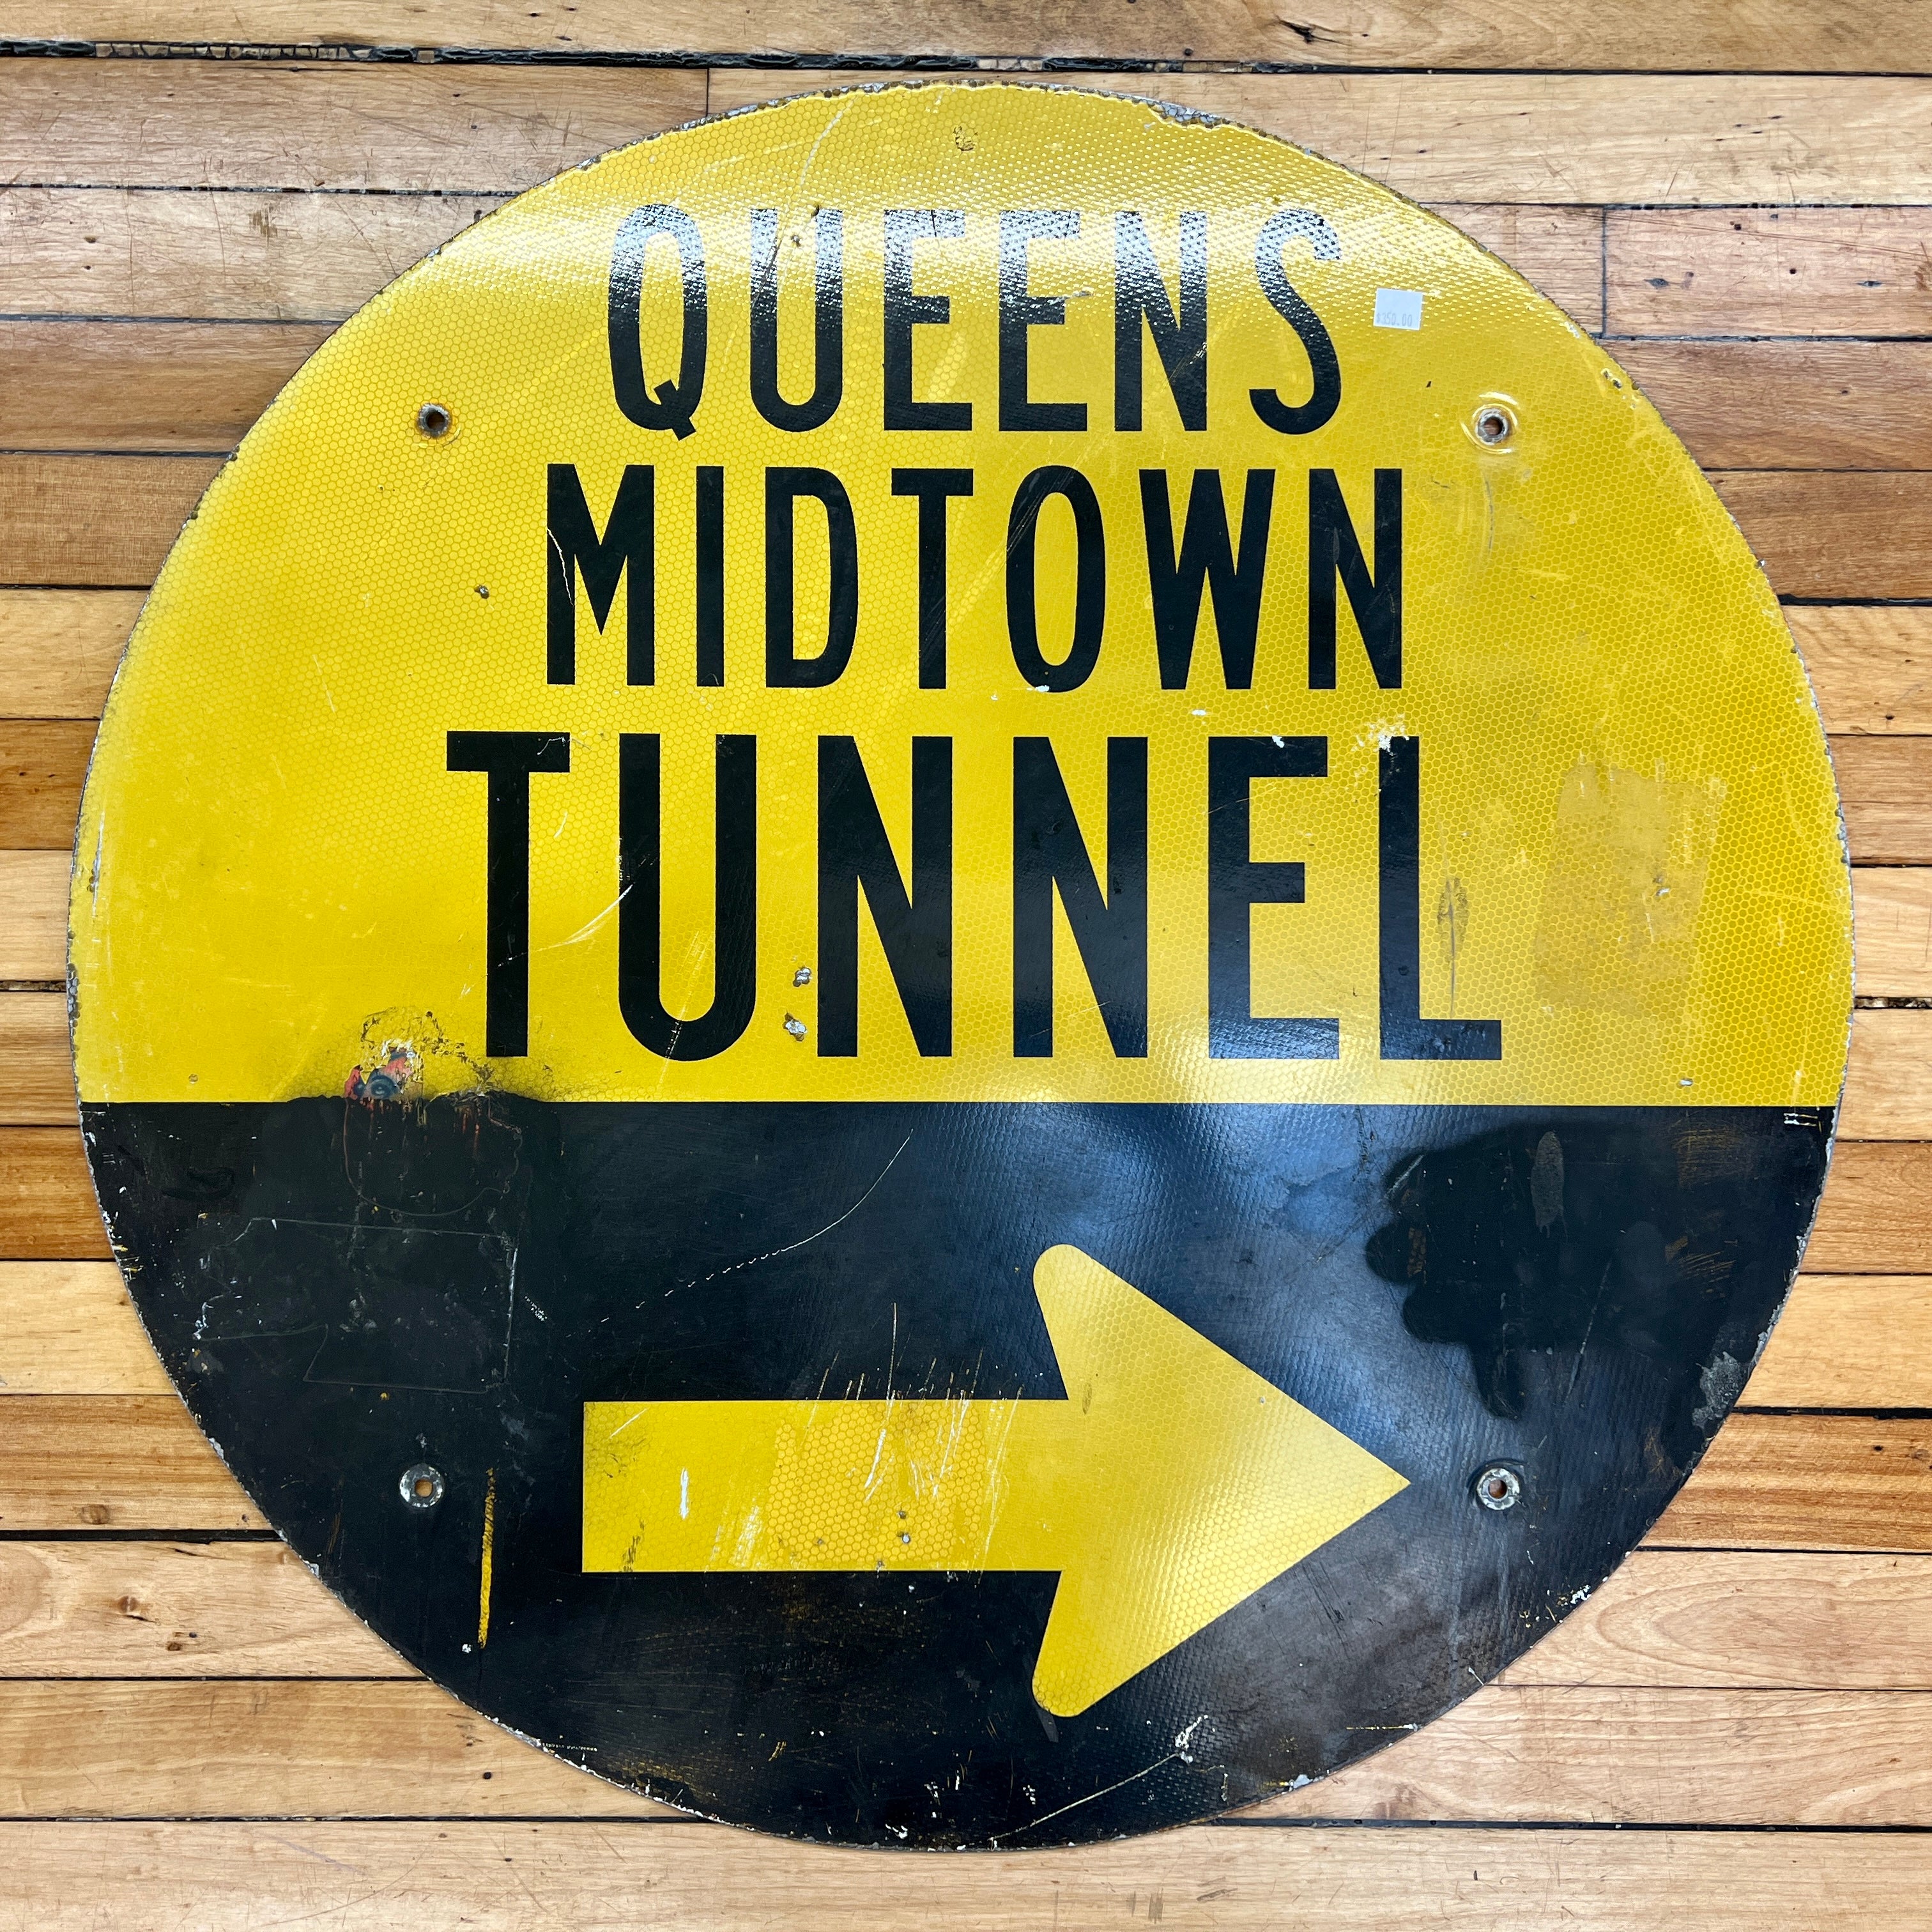 Queens Midtown Tunnel, New York, NY Sign (Ver. 1)